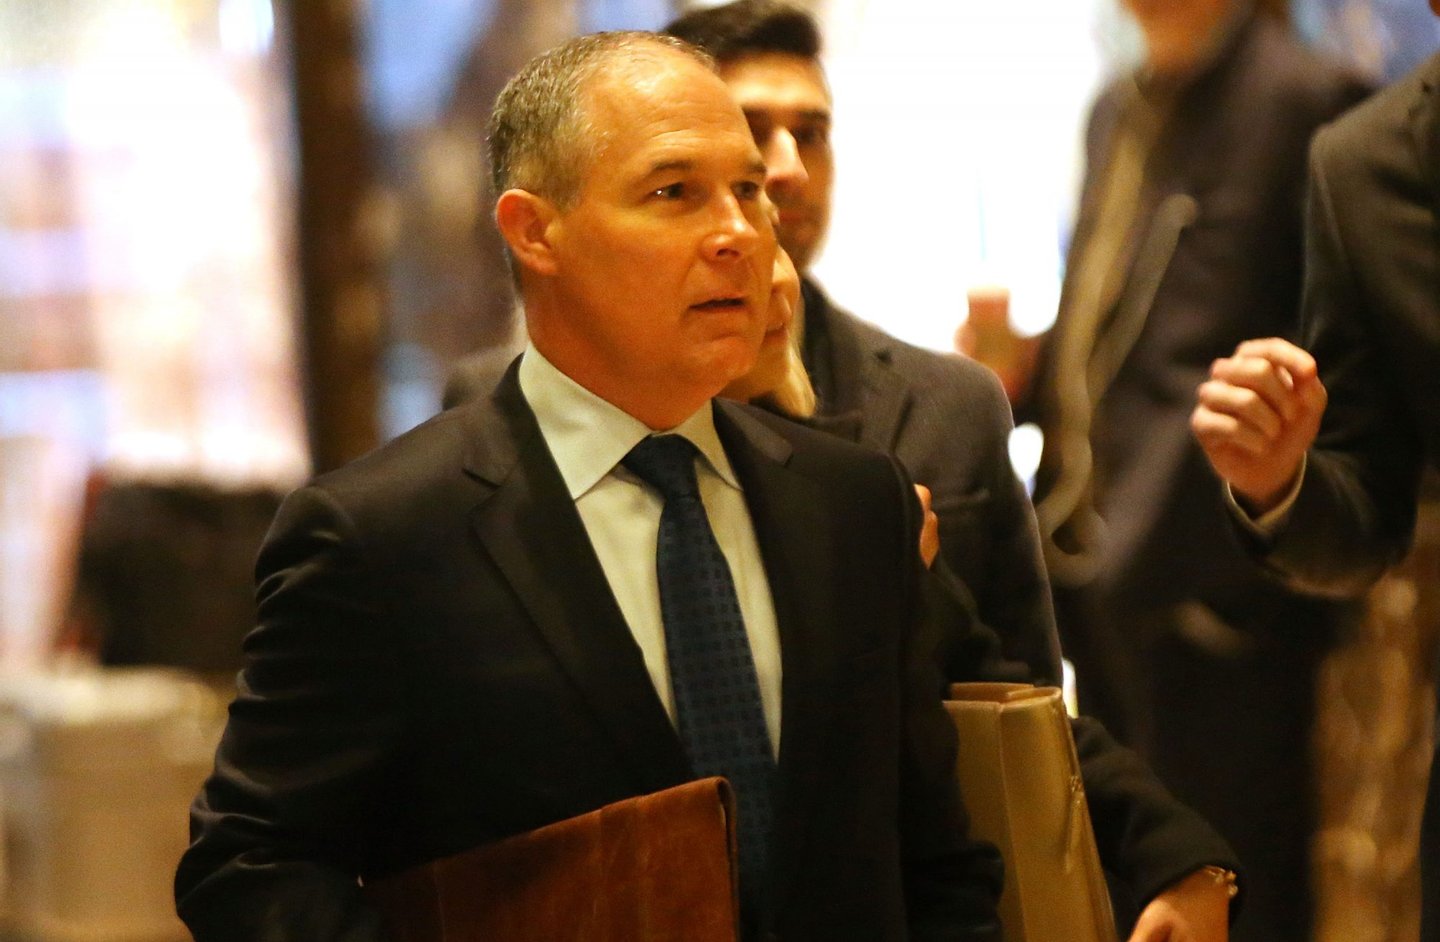 NEW YORK, NY - DECEMBER 07: Oklahoma Attorney General Scott Pruitt arrives at Trump Tower on December 7, 2016 in New York City. Potential members of President-elect Donald Trump's cabinet have been meeting with him and his transition team of the last few weeks. (Photo by Spencer Platt/Getty Images)